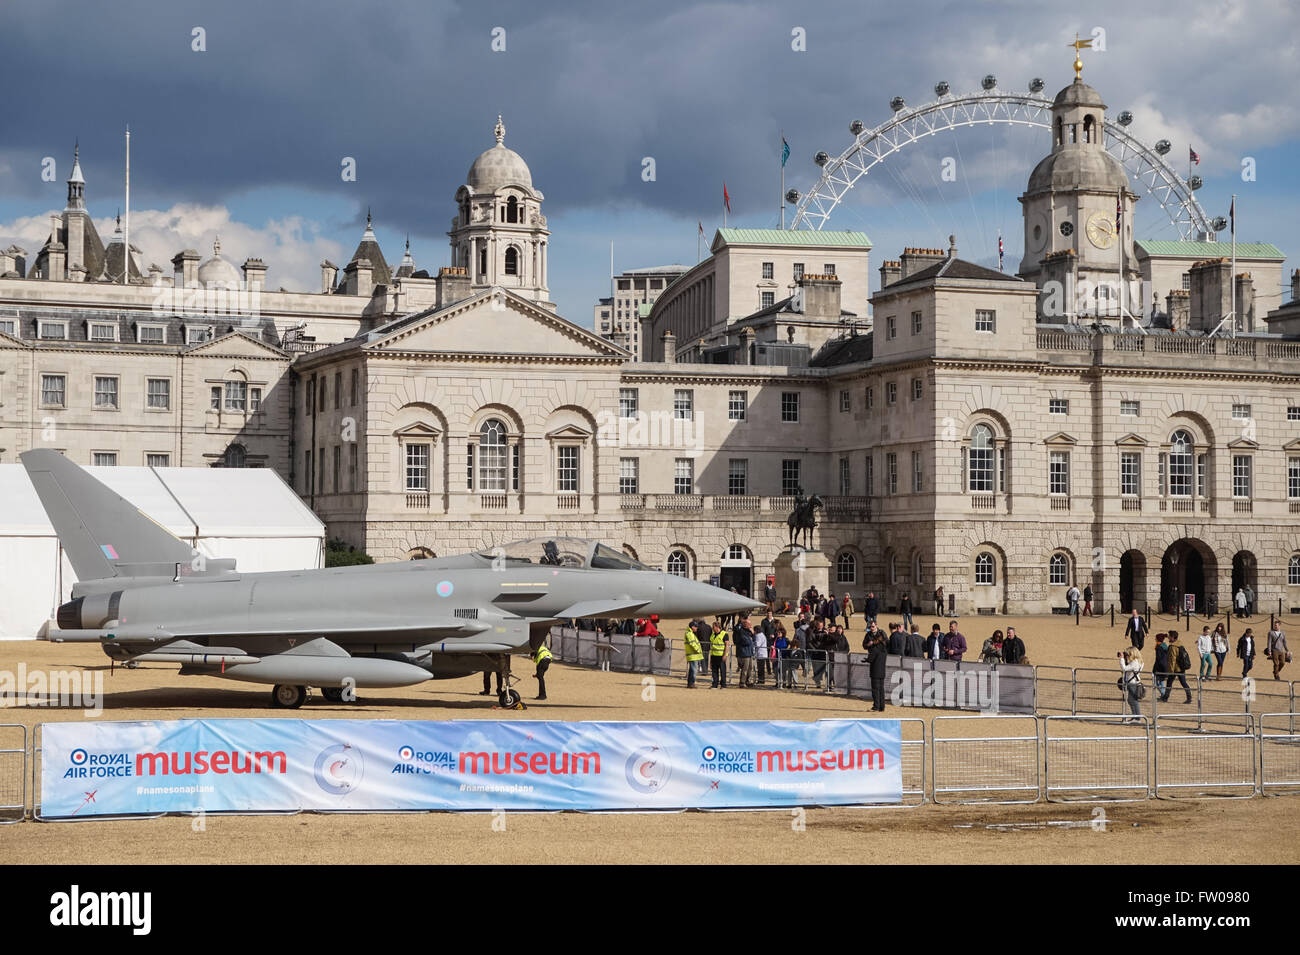 Full-size replica of a Eurofighter Typhoon exhibited at Horse Guards Parade in London to mark the 100th anniversary of the RAF, London England United Kingdom UK Stock Photo